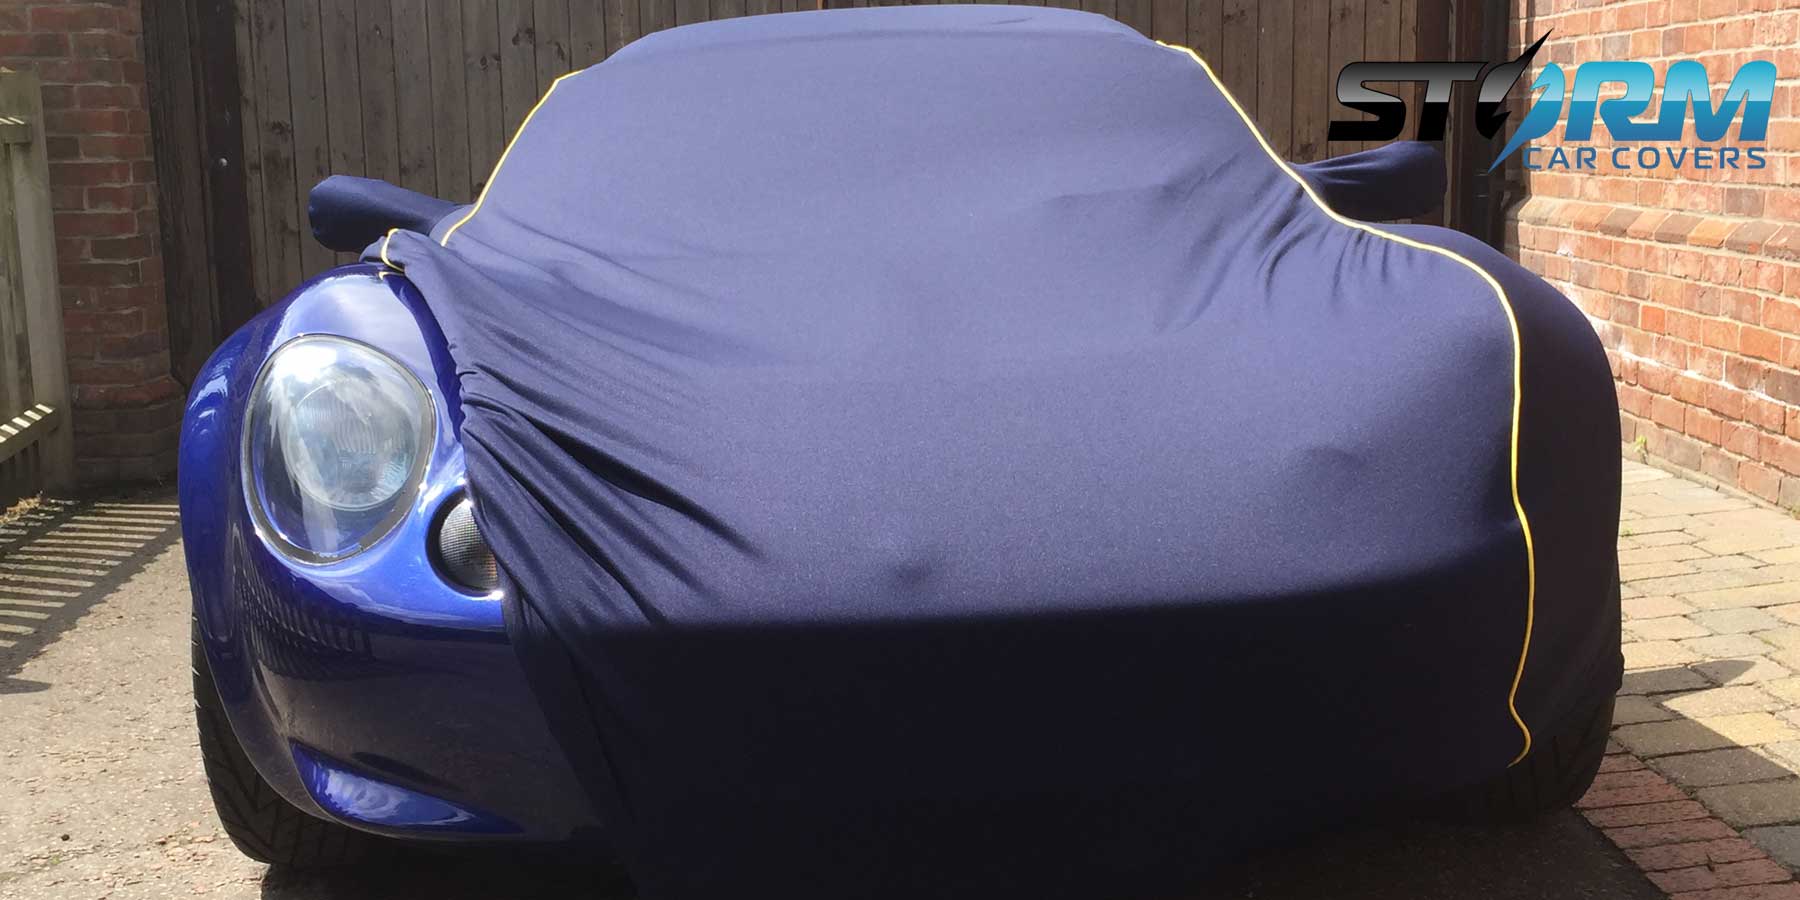 Sahara Indoor dust car covers for VAUXHALL - Storm Car Covers